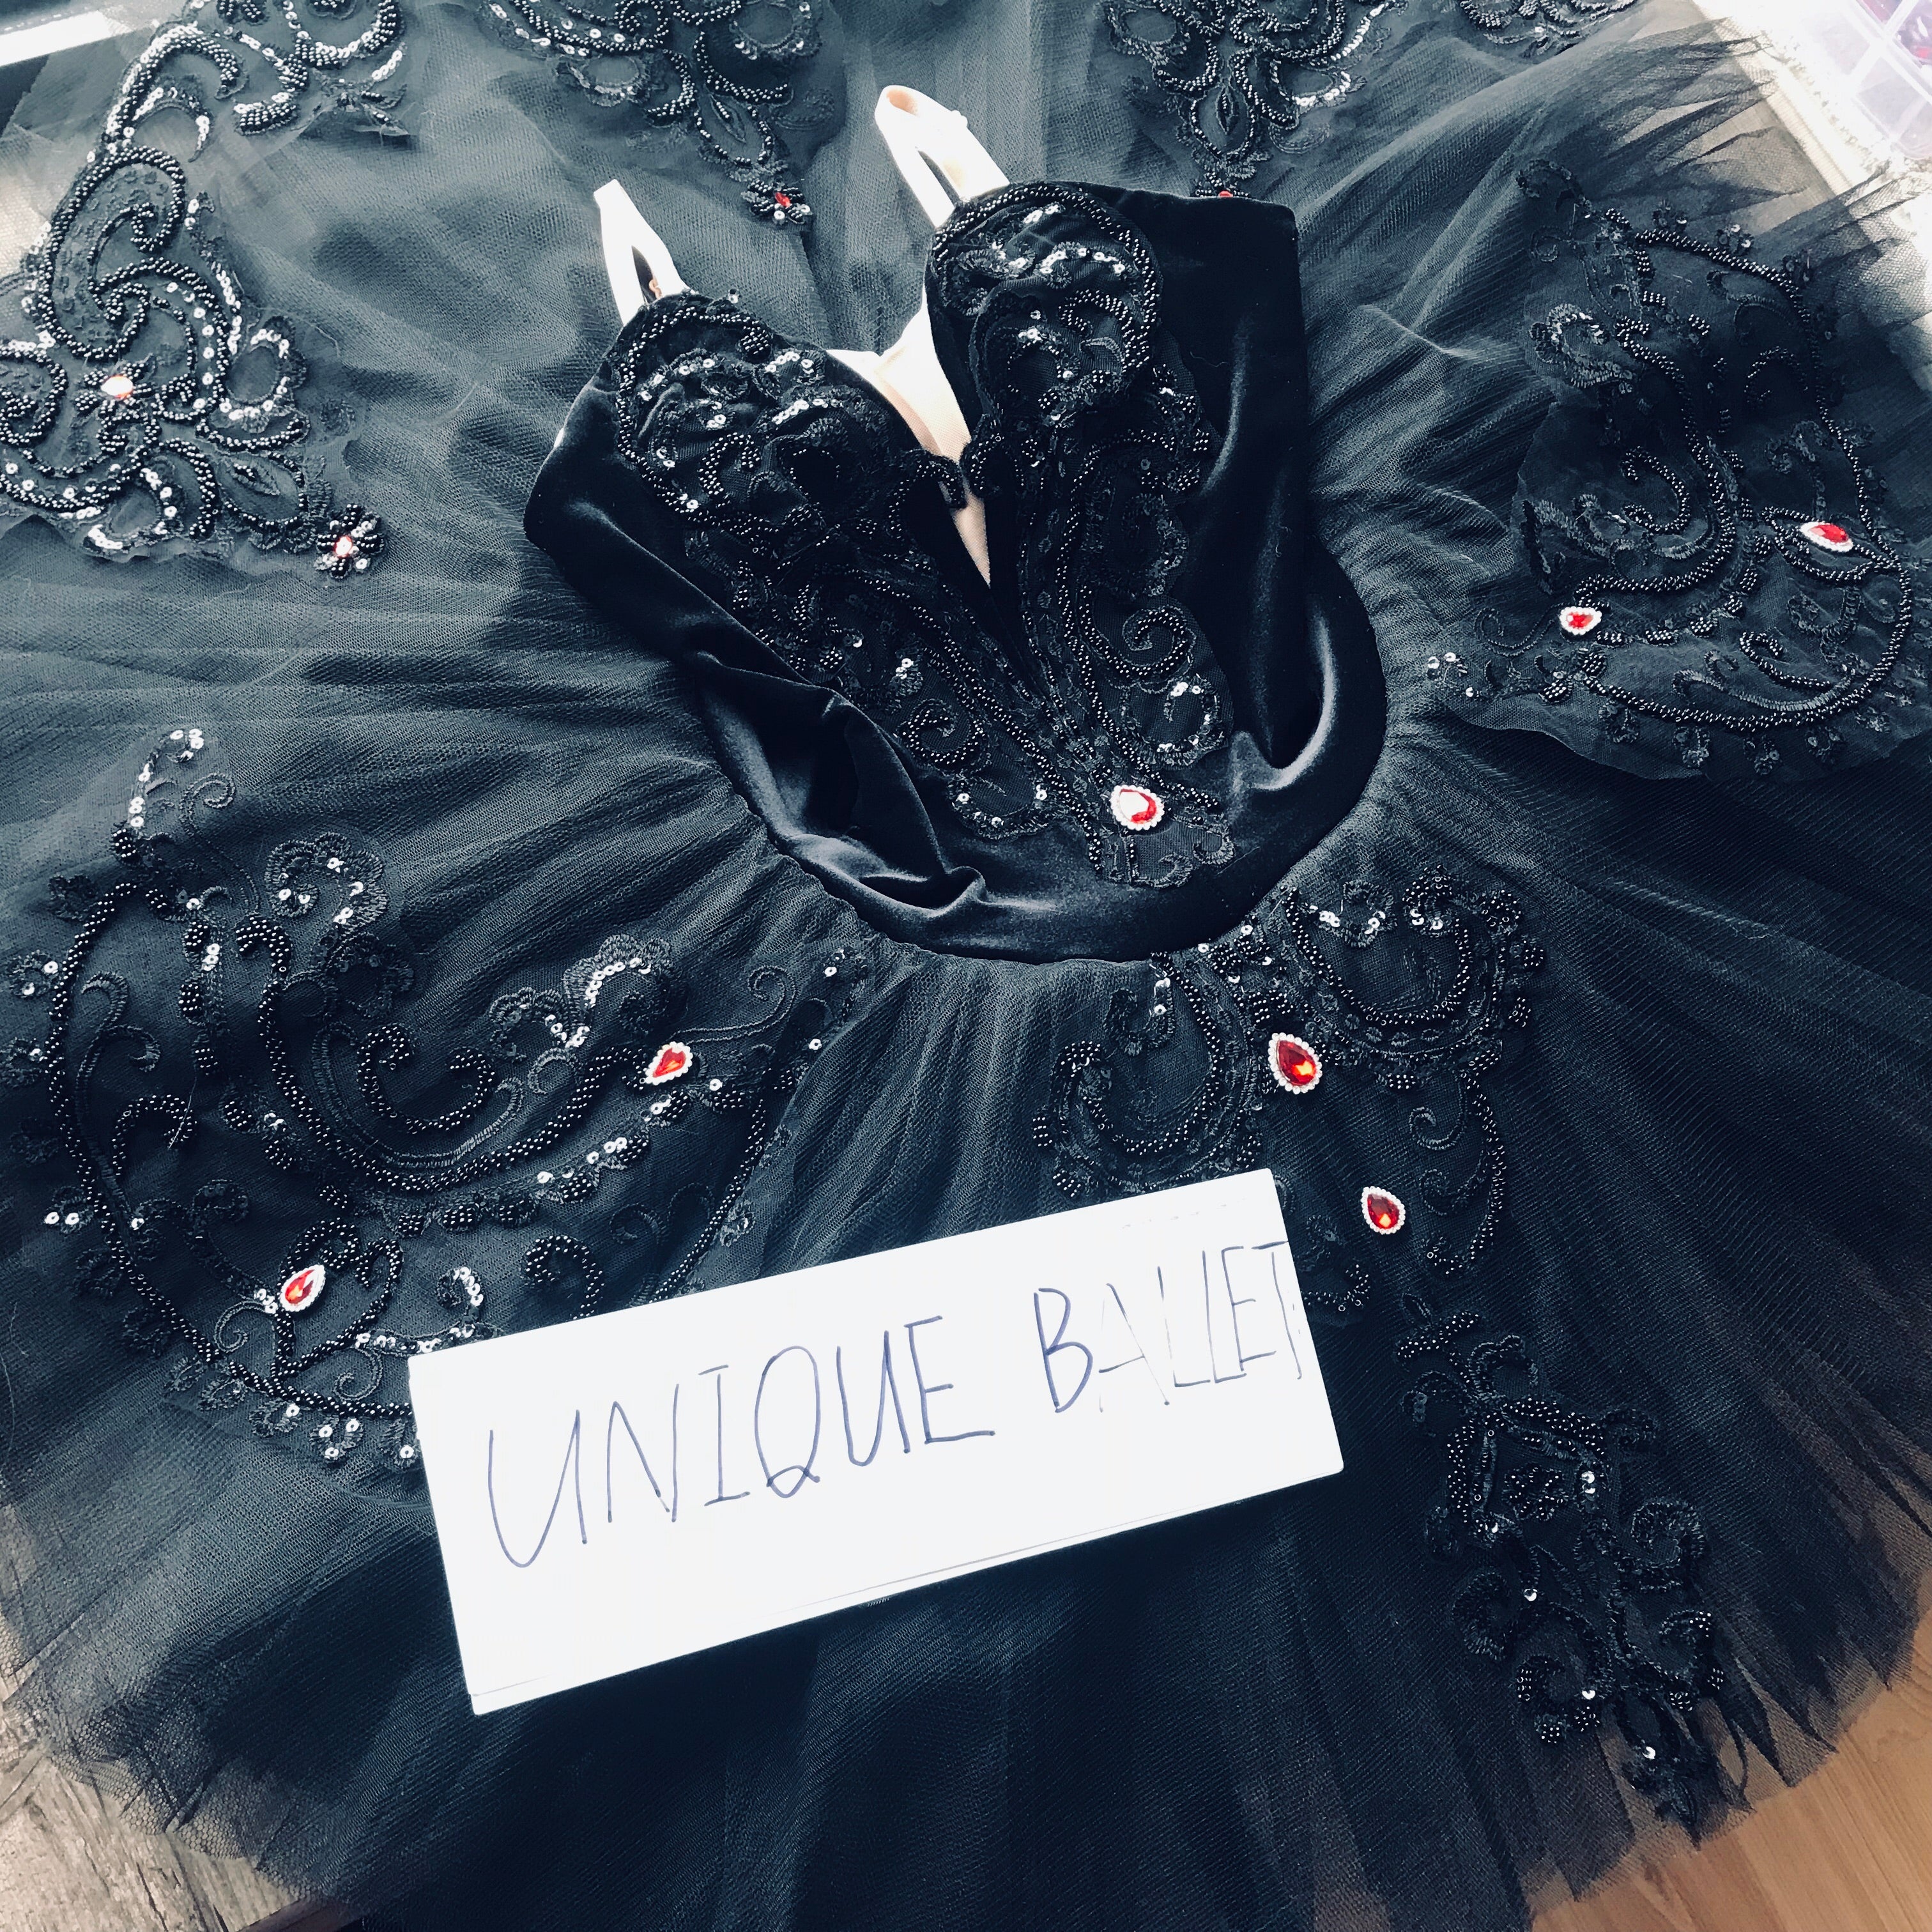 Swan Lake Odile Classic Ballet Costume Black Swan Ballet Tutu Dress Stage Costume (Cost-Effective)-WD-BLKSWN